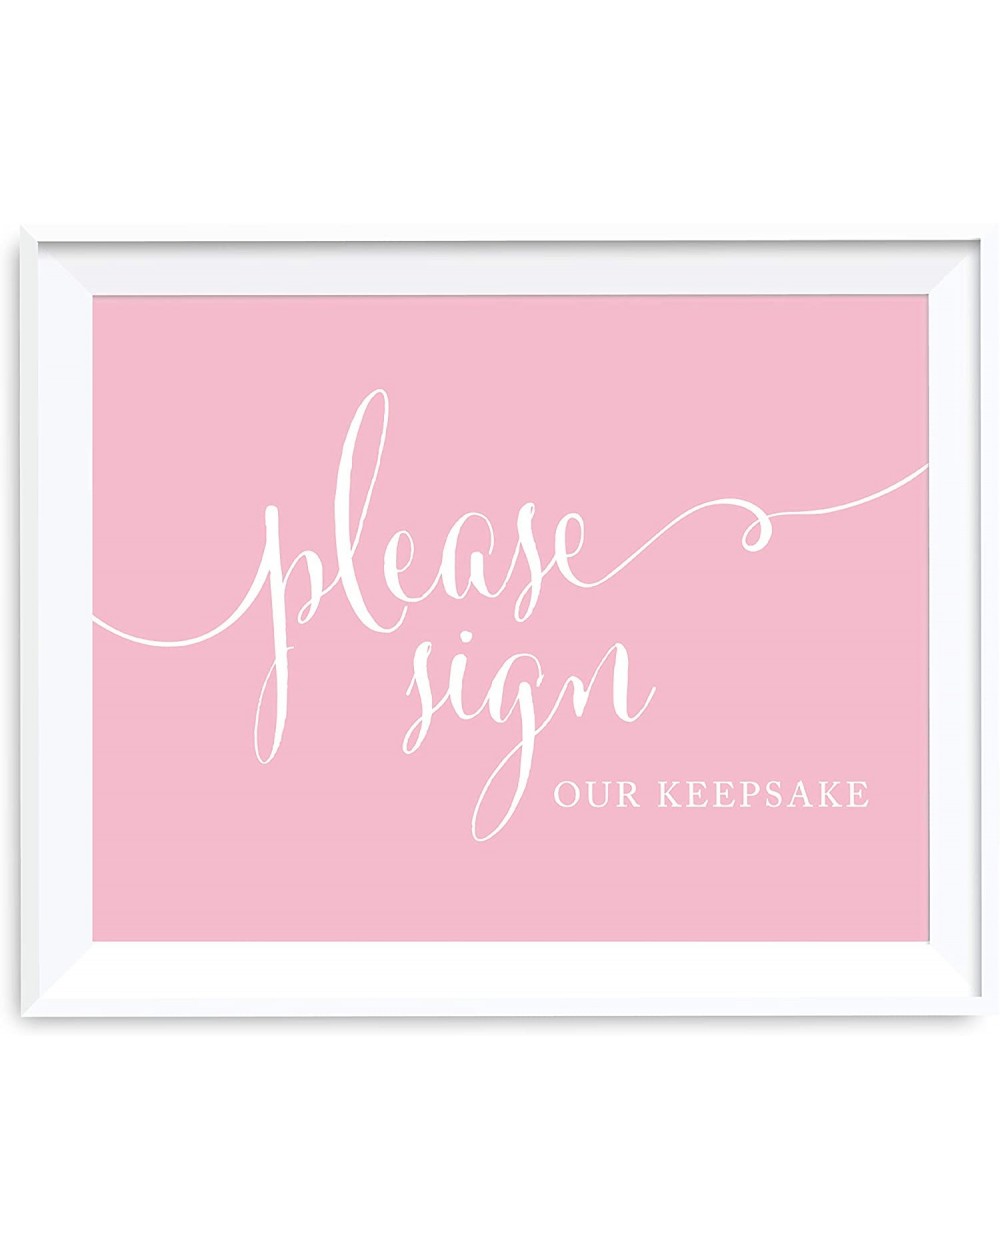 Banners & Garlands Andaz Wedding Party Signs- Blush Pink- 8.5x11-inch- Please Sign Our Keepsake Table Sign- 1-Pack - CJ12FA7L...